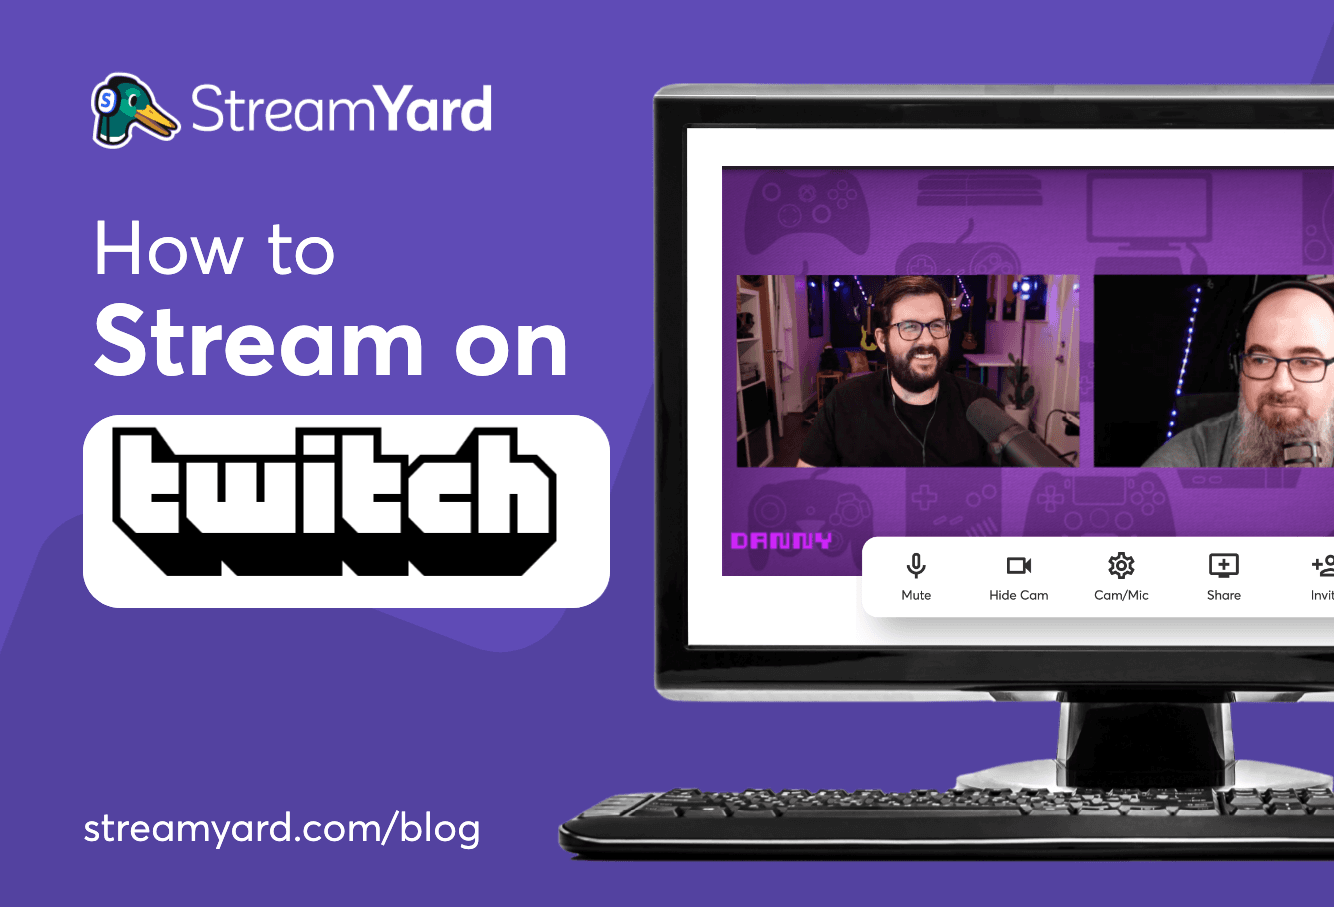 Learn how to stream on Twitch and grow your audience. Here's a quick step-by-step guide to help you get started.